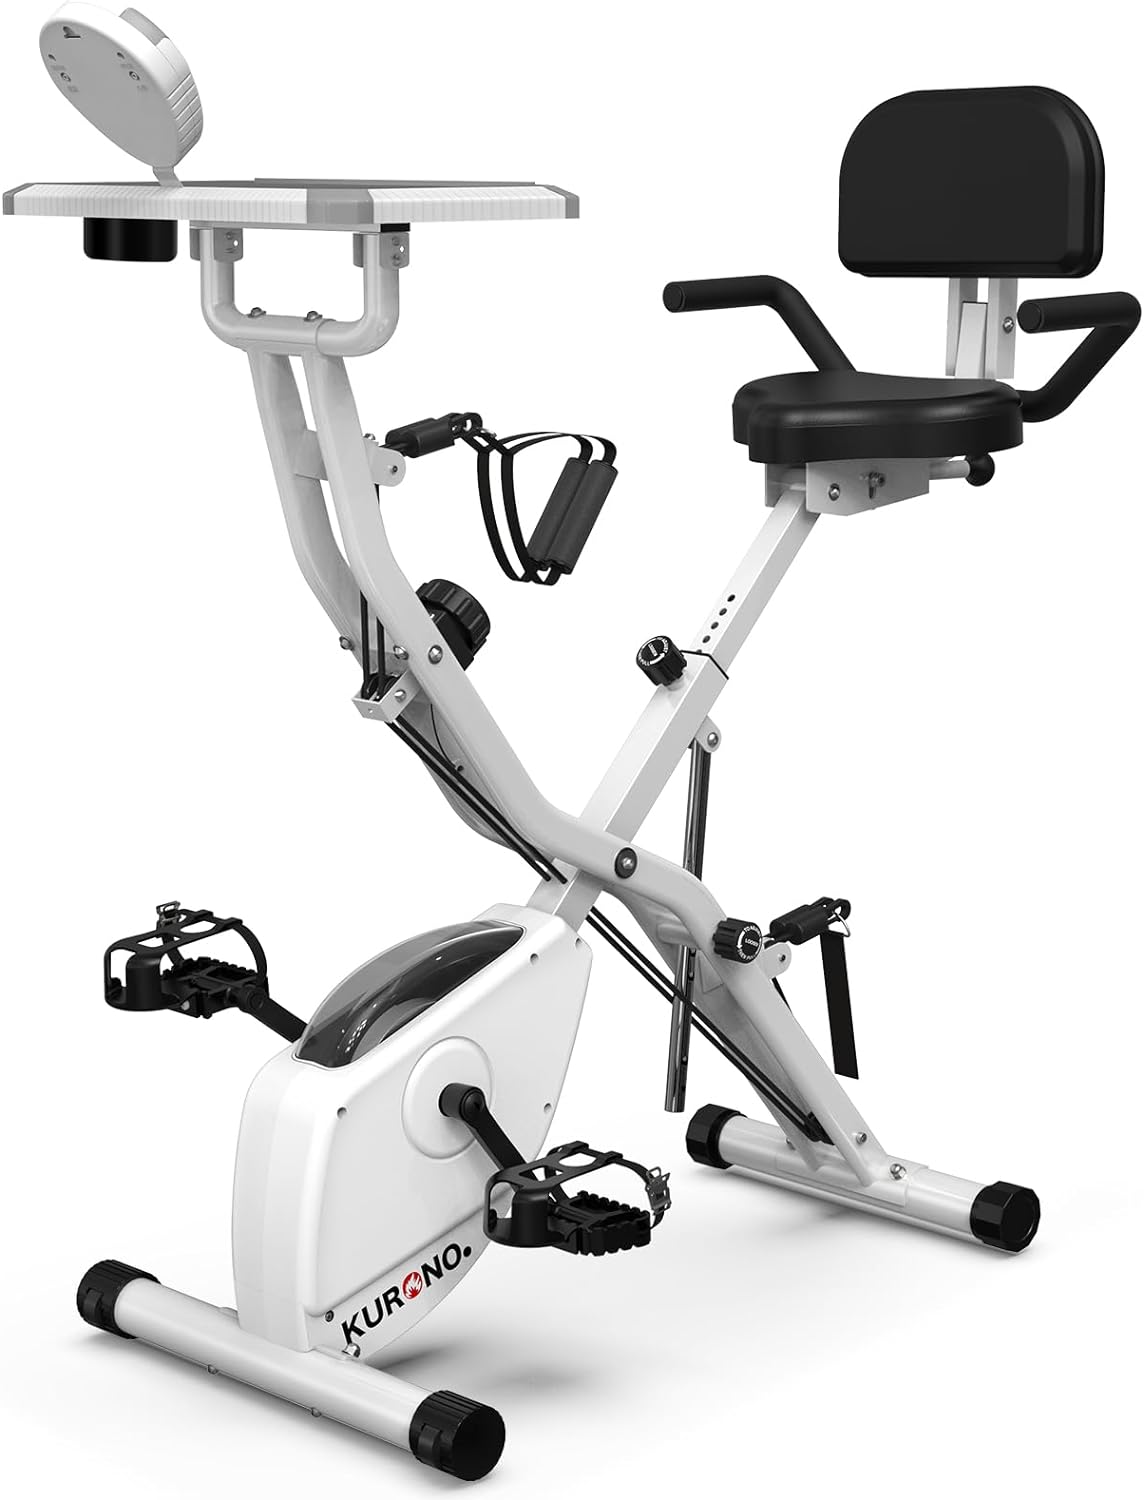 KURONO Exercise Bike for Home Workout Stationary Bike with Table | Foldable Indoor Cycling Bike for Seniors | 330 LB Capacity and Seat Backrest Adjustments - image 1 of 7